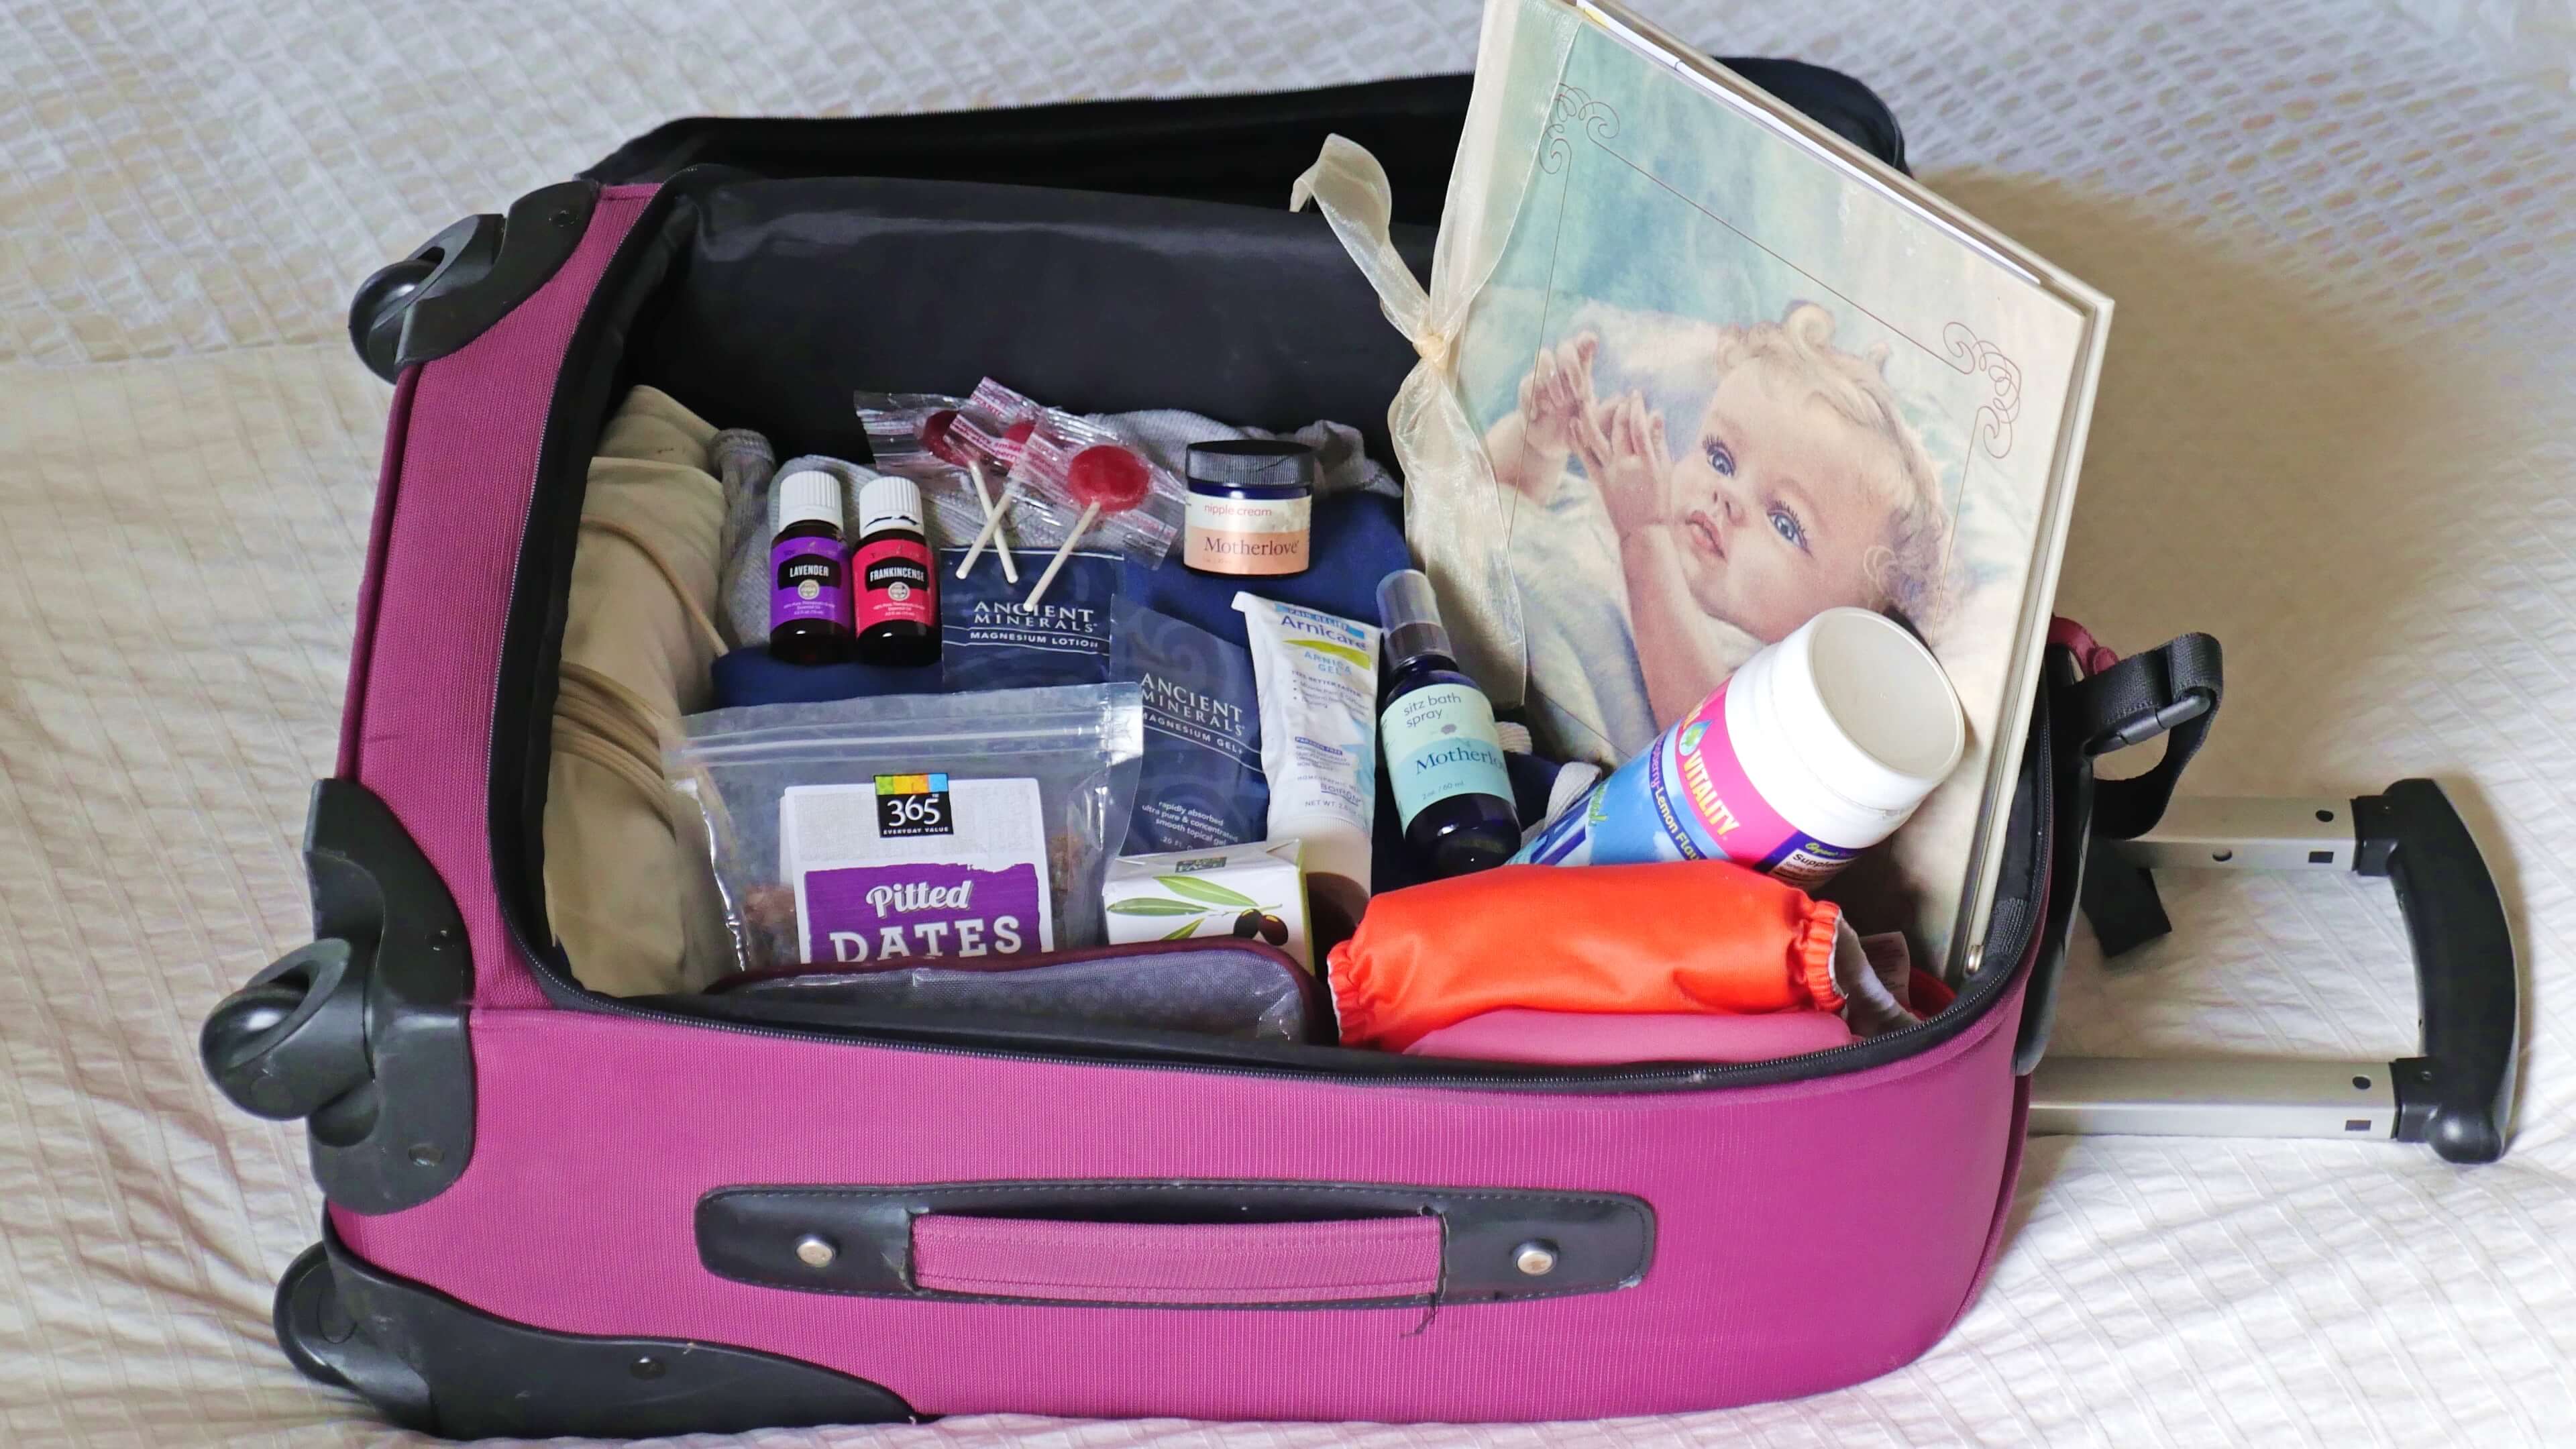 https://www.mamanatural.com/wp-content/uploads/Hospital-Bag-Checklist-What-to-Bring-When-You%E2%80%99re-Having-a-Baby-by-Mama-Natural.jpg